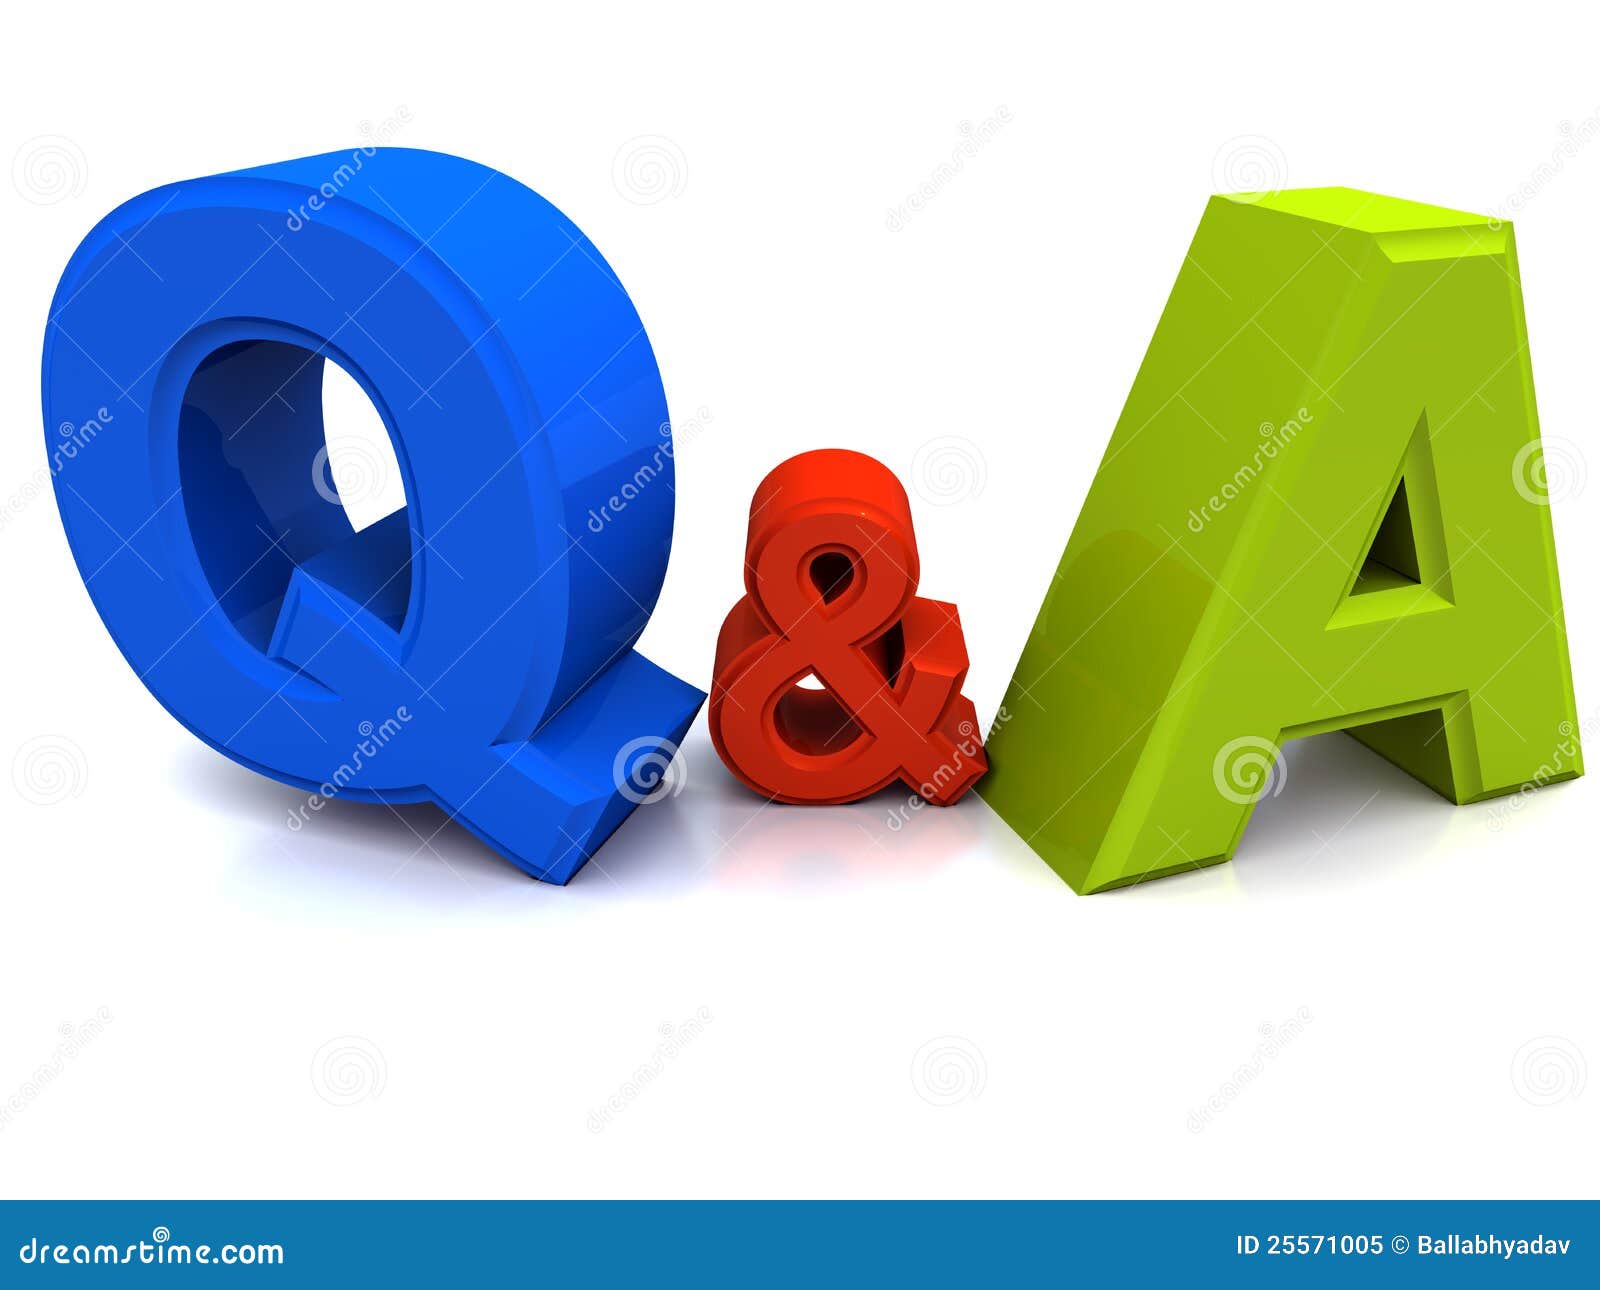 questions and answers clipart - photo #30